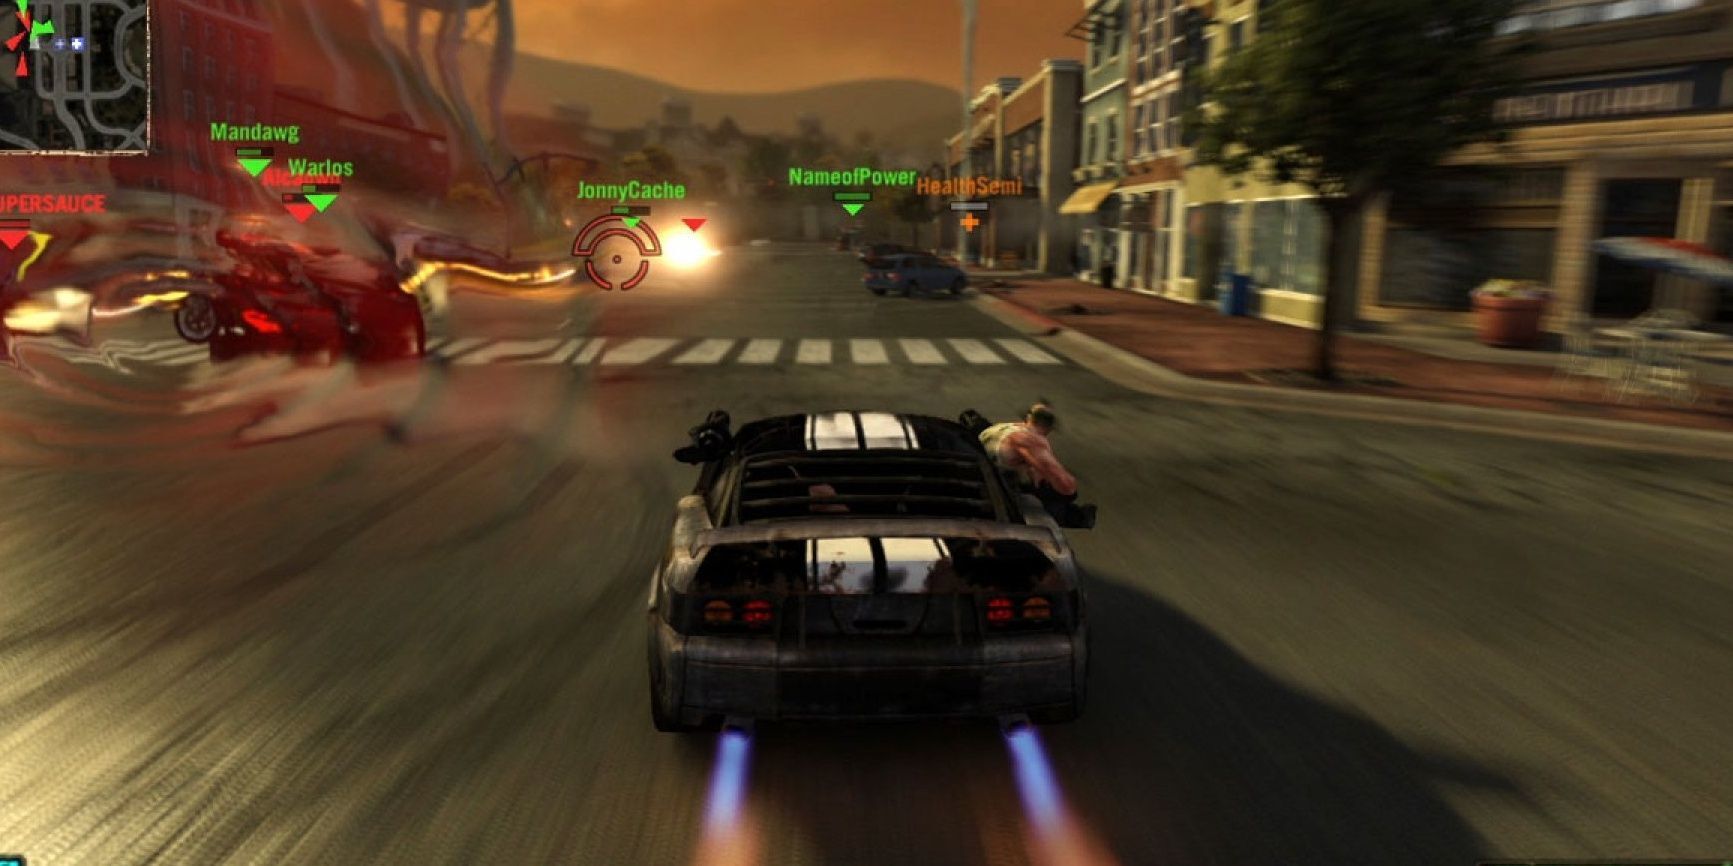 A new Twisted Metal game is reportedly in the works